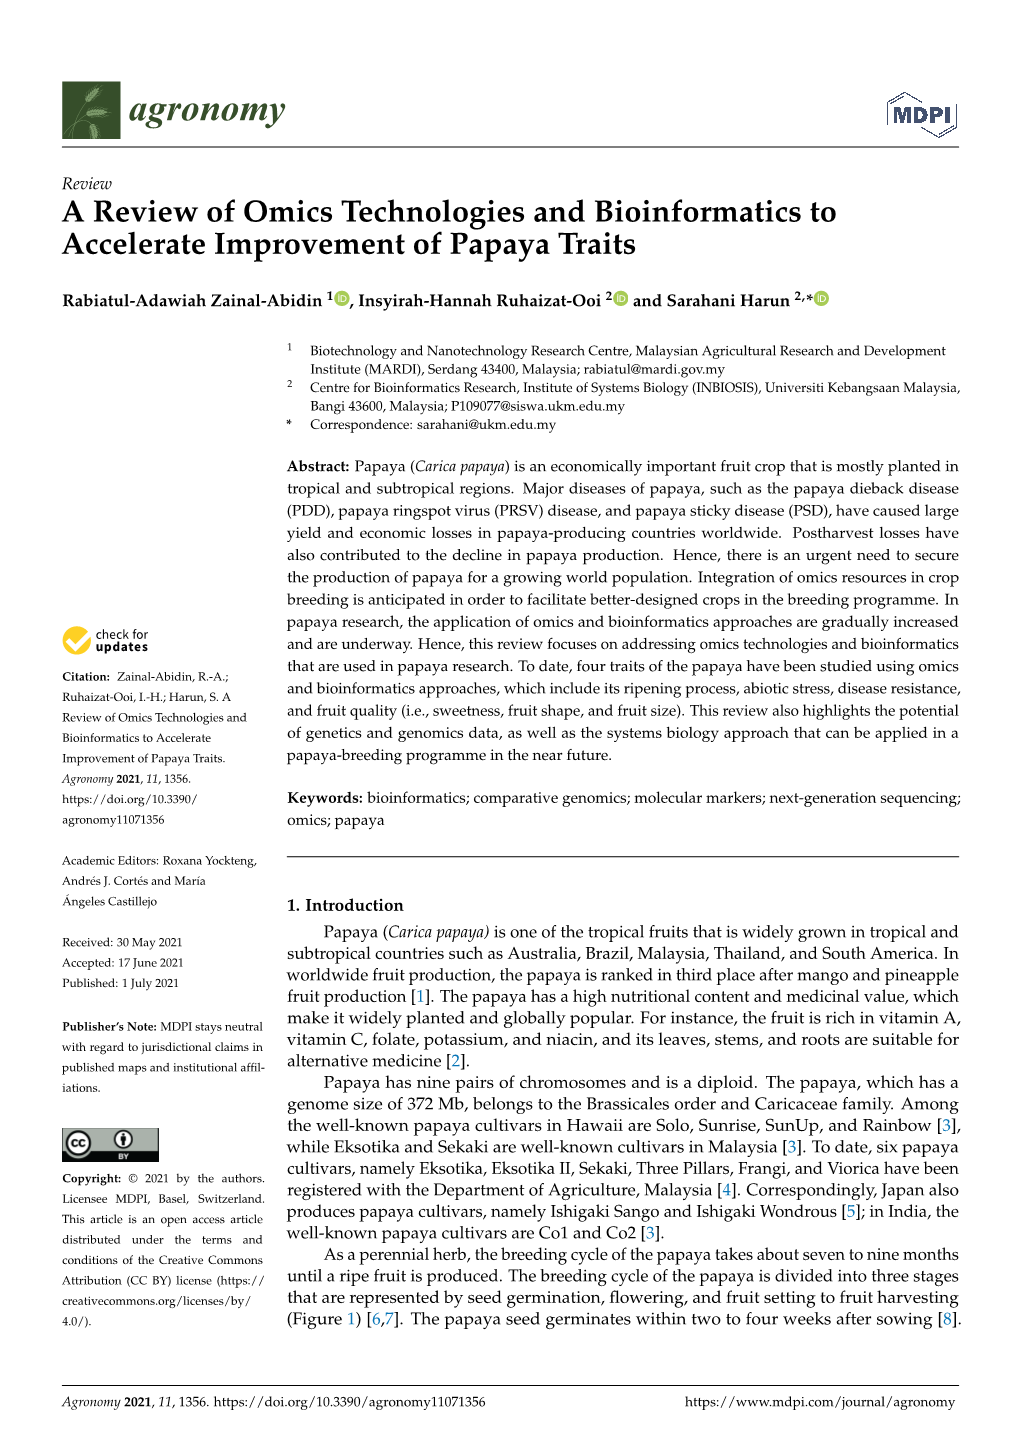 A Review of Omics Technologies and Bioinformatics to Accelerate Improvement of Papaya Traits